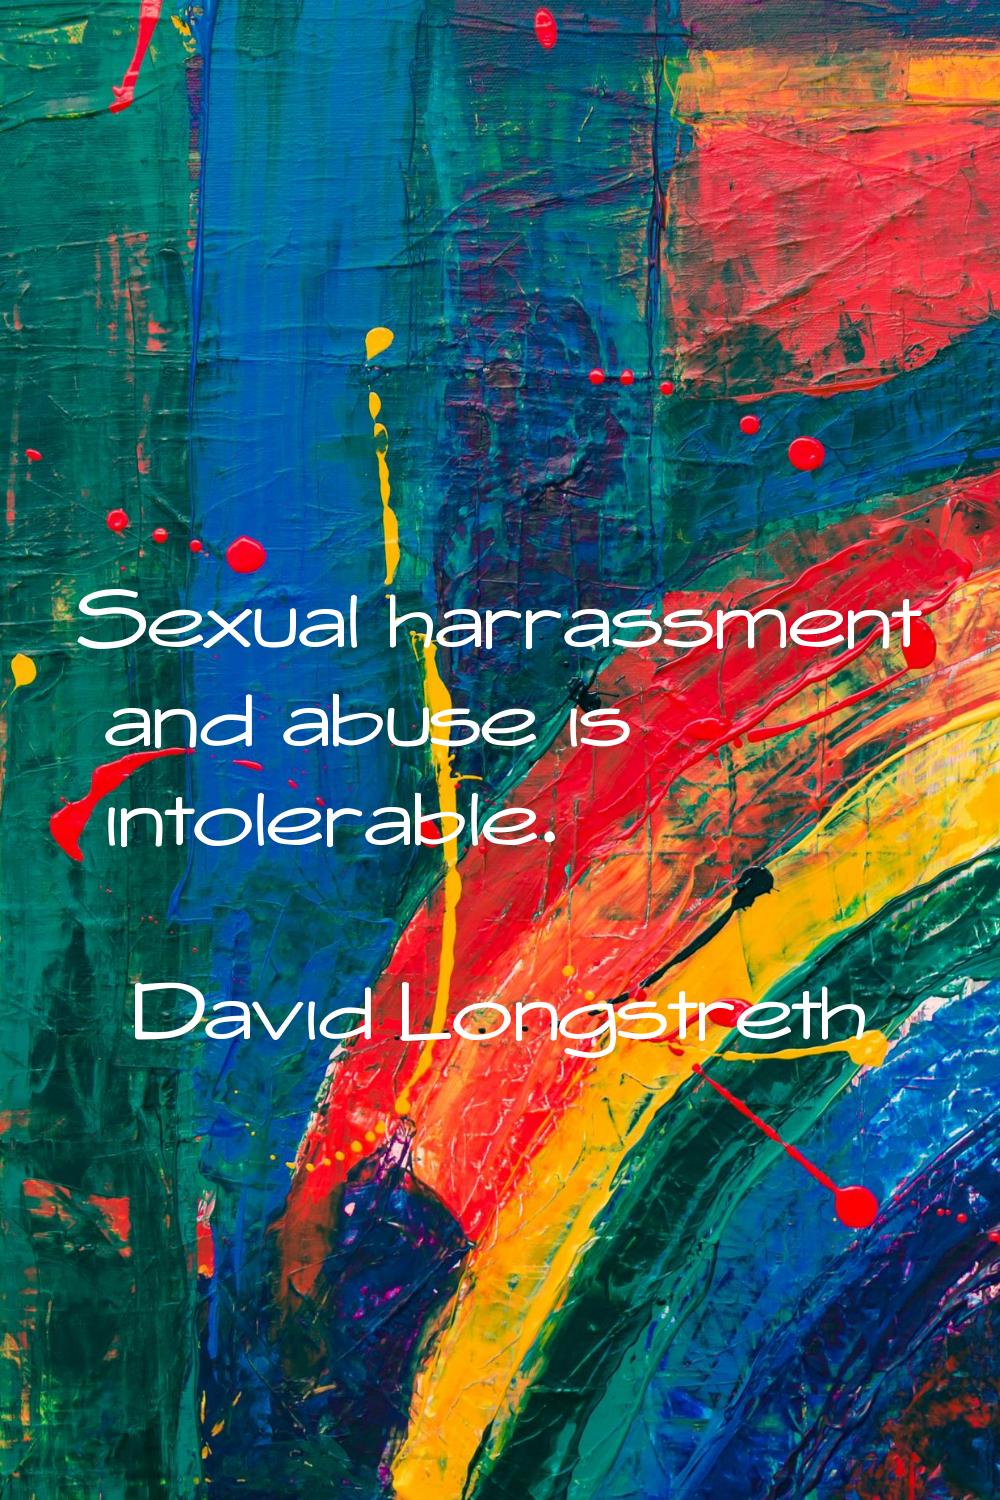 Sexual harrassment and abuse is intolerable.